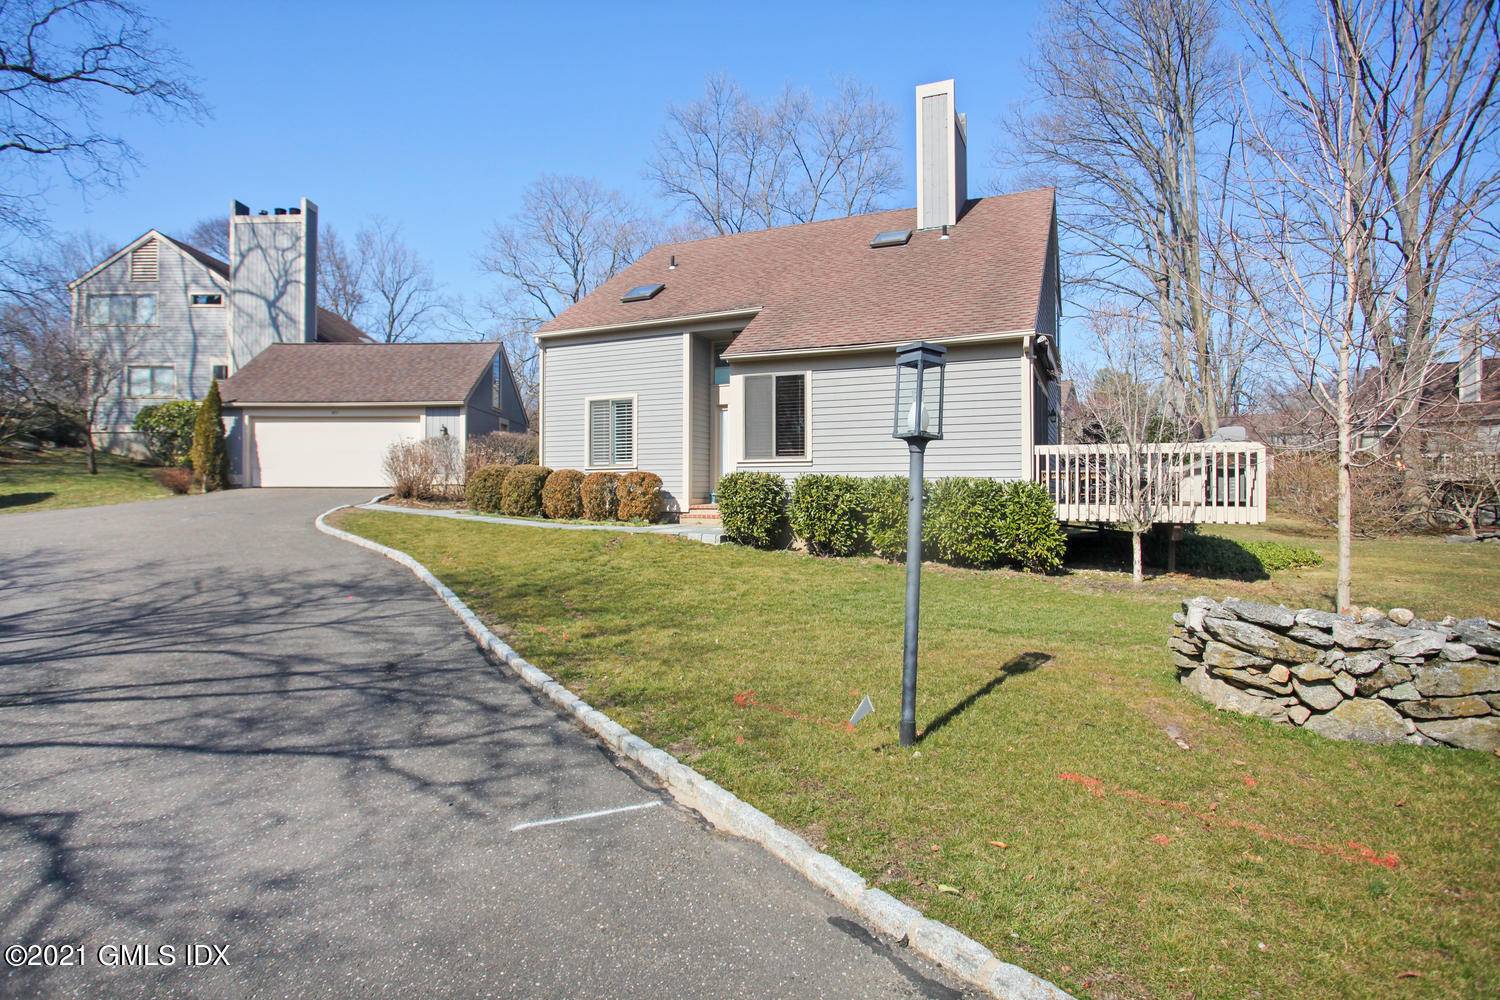 This recently renovated 3 BR, 3 BA home is located on a quiet West Lyon Farm cul de sac facing a meadow.